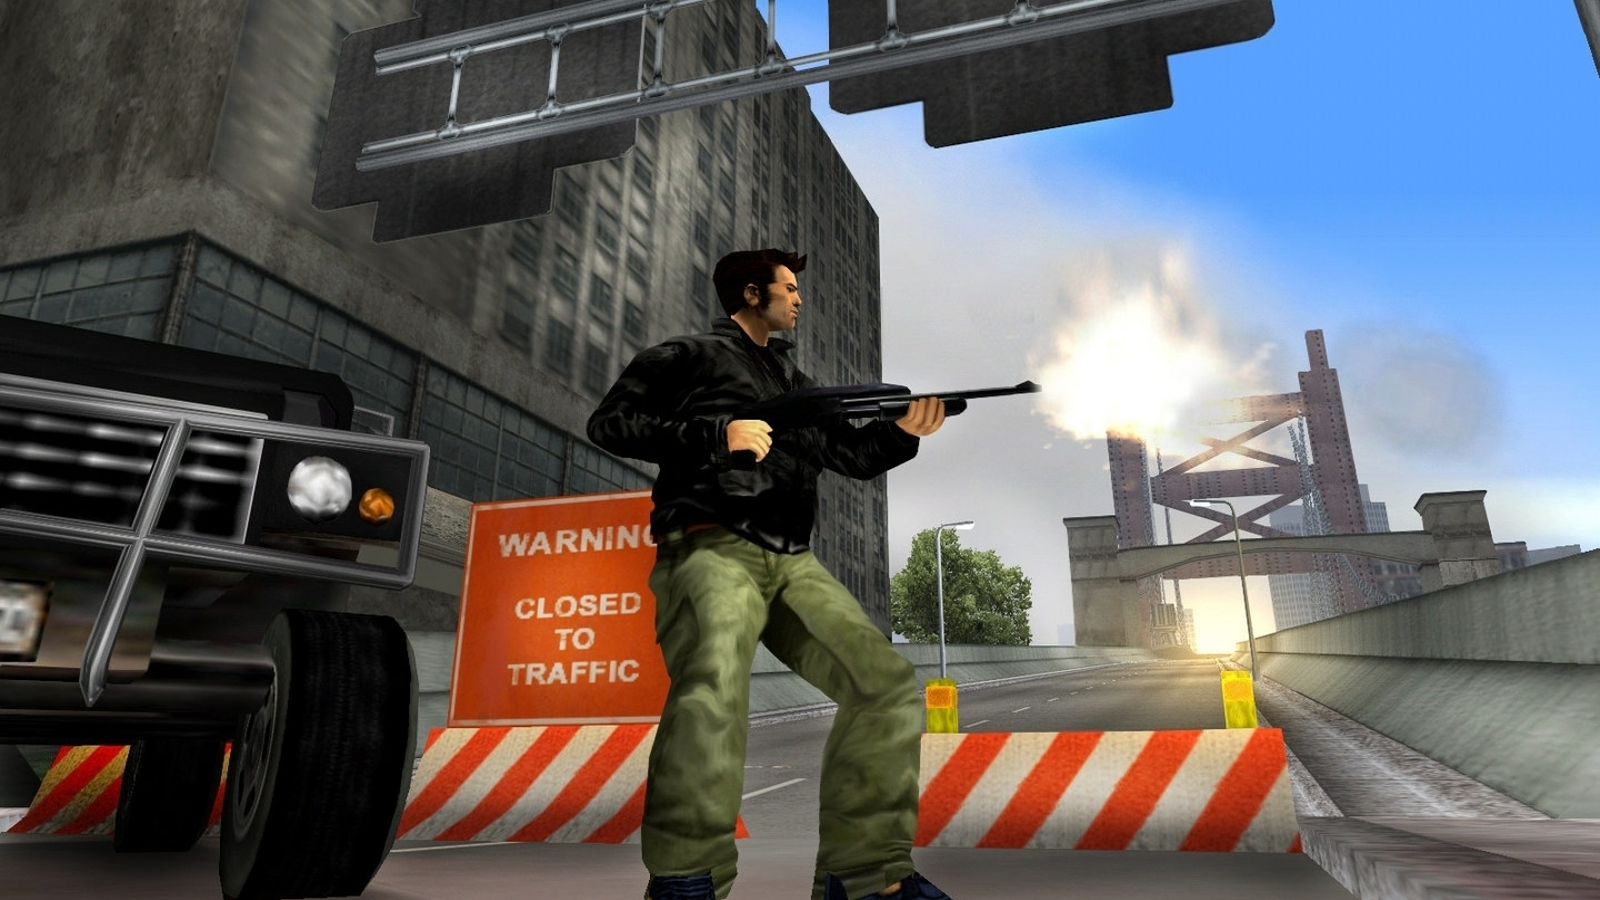 Grand Theft Auto III – The Definitive Edition on Steam